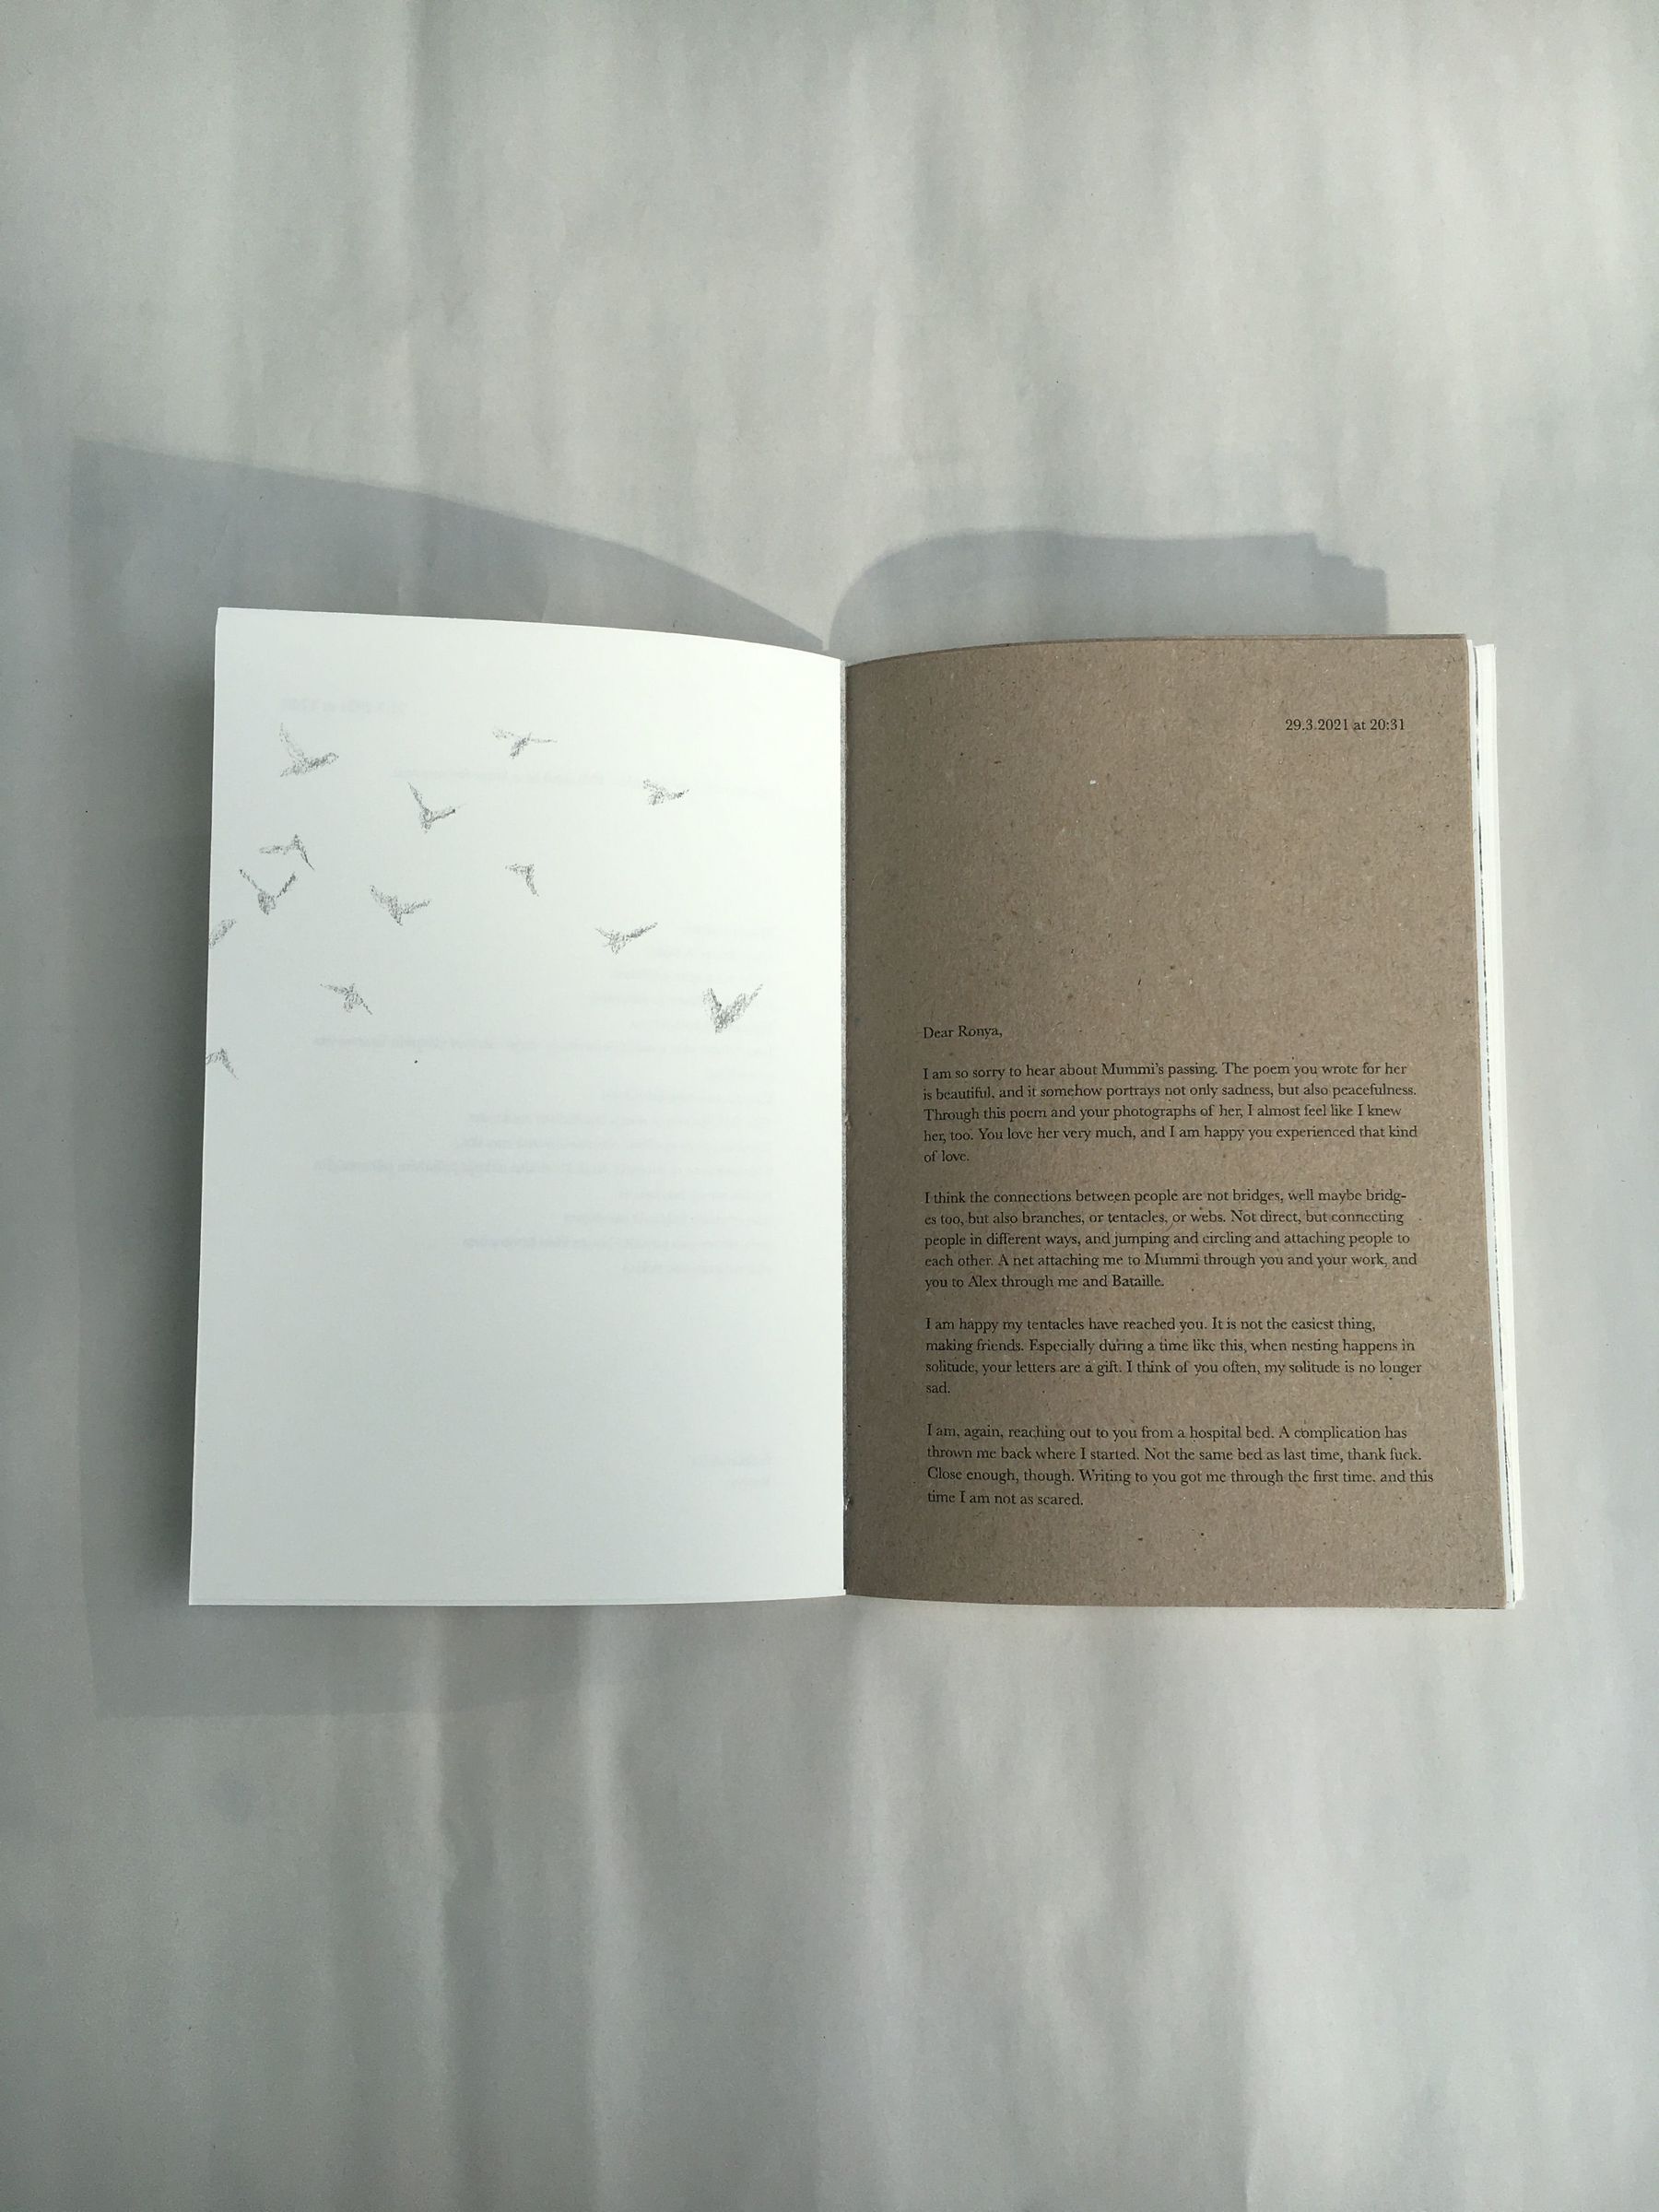 The book lays open against a white background. One page shows an illustration of birds flying; the other page, printed on brown paper, shows a letter from one artist to the other